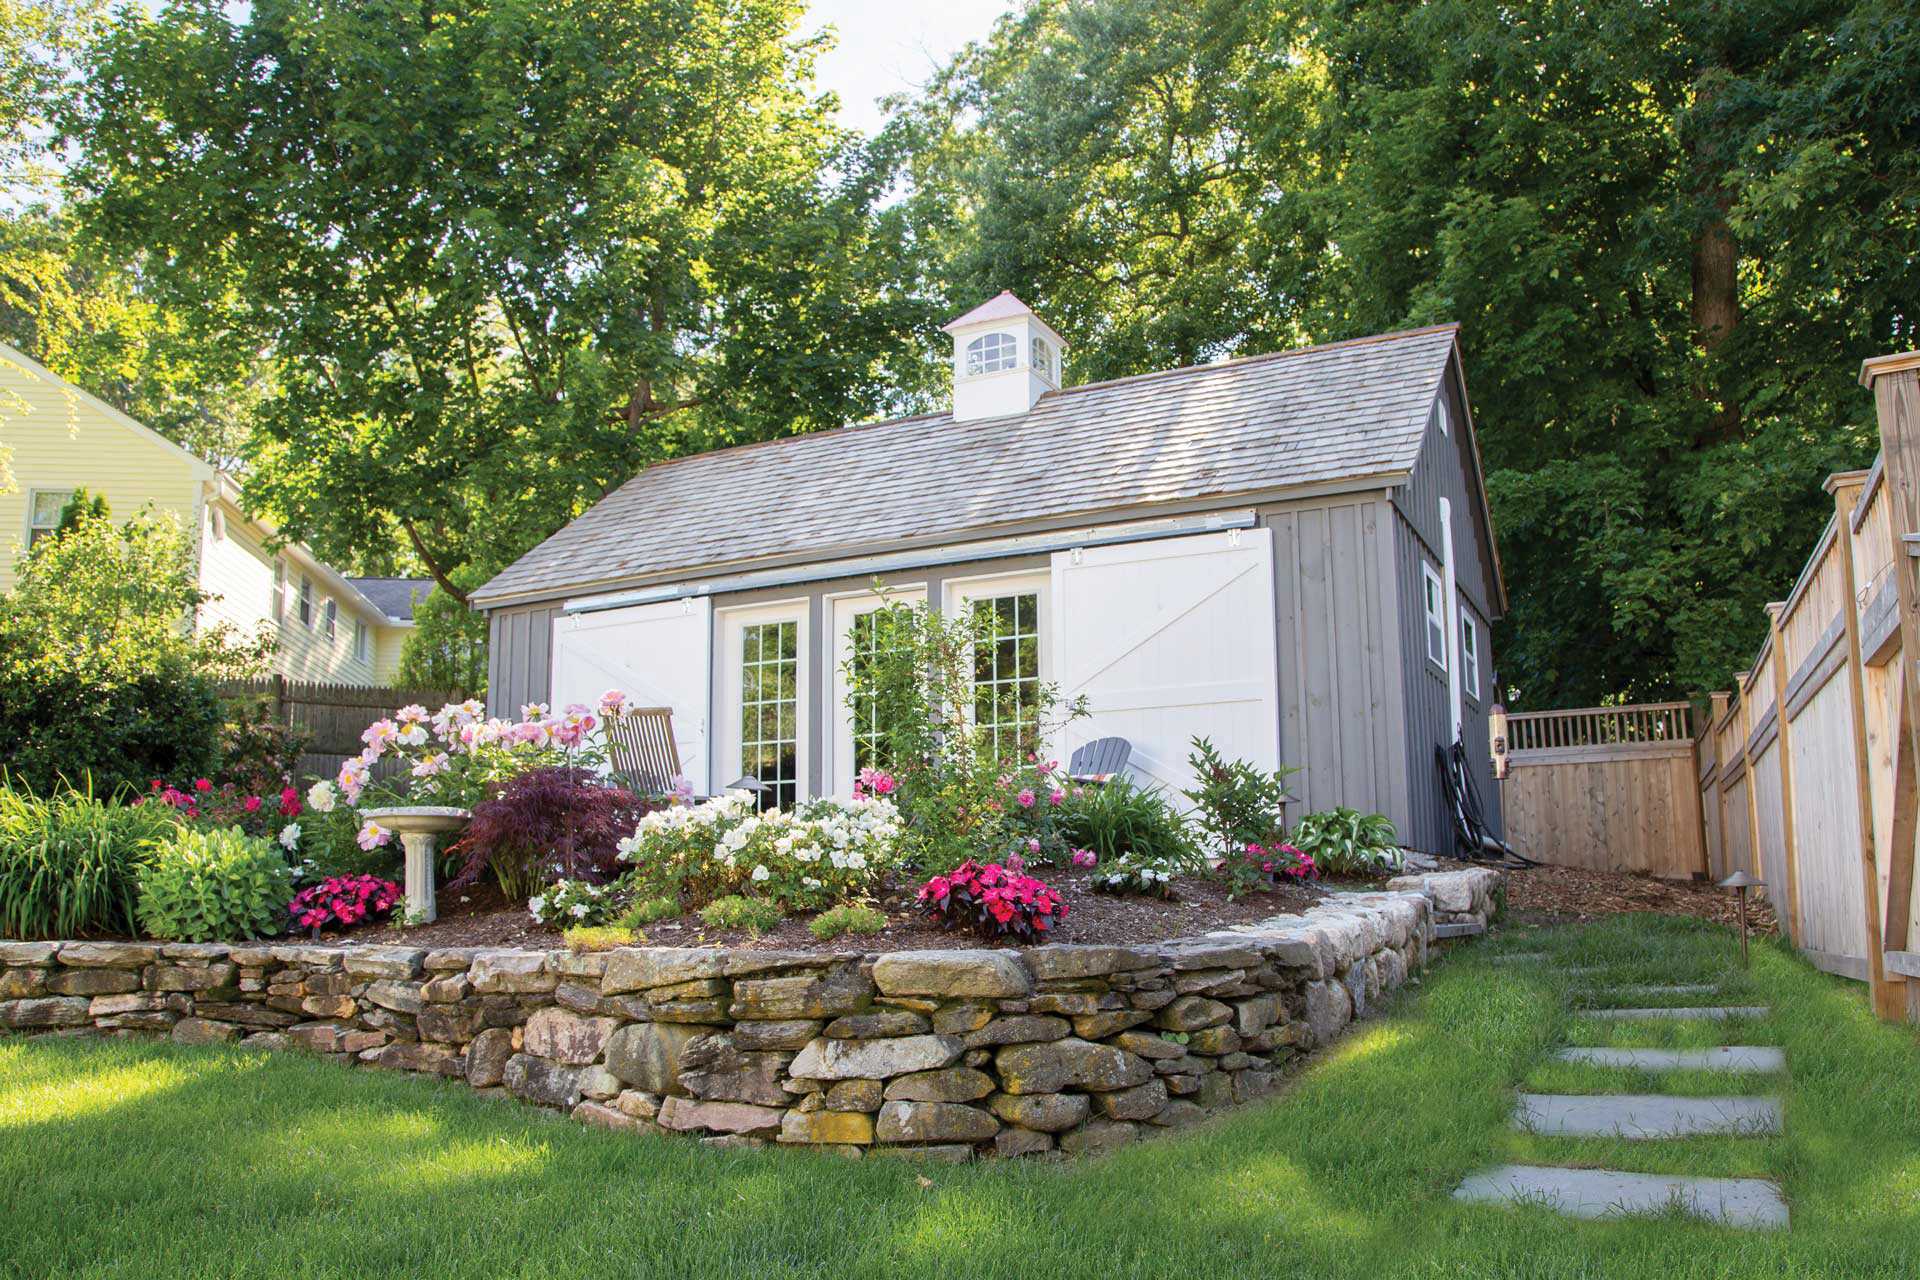 5 Must-Have Custom Shed Features in 2021